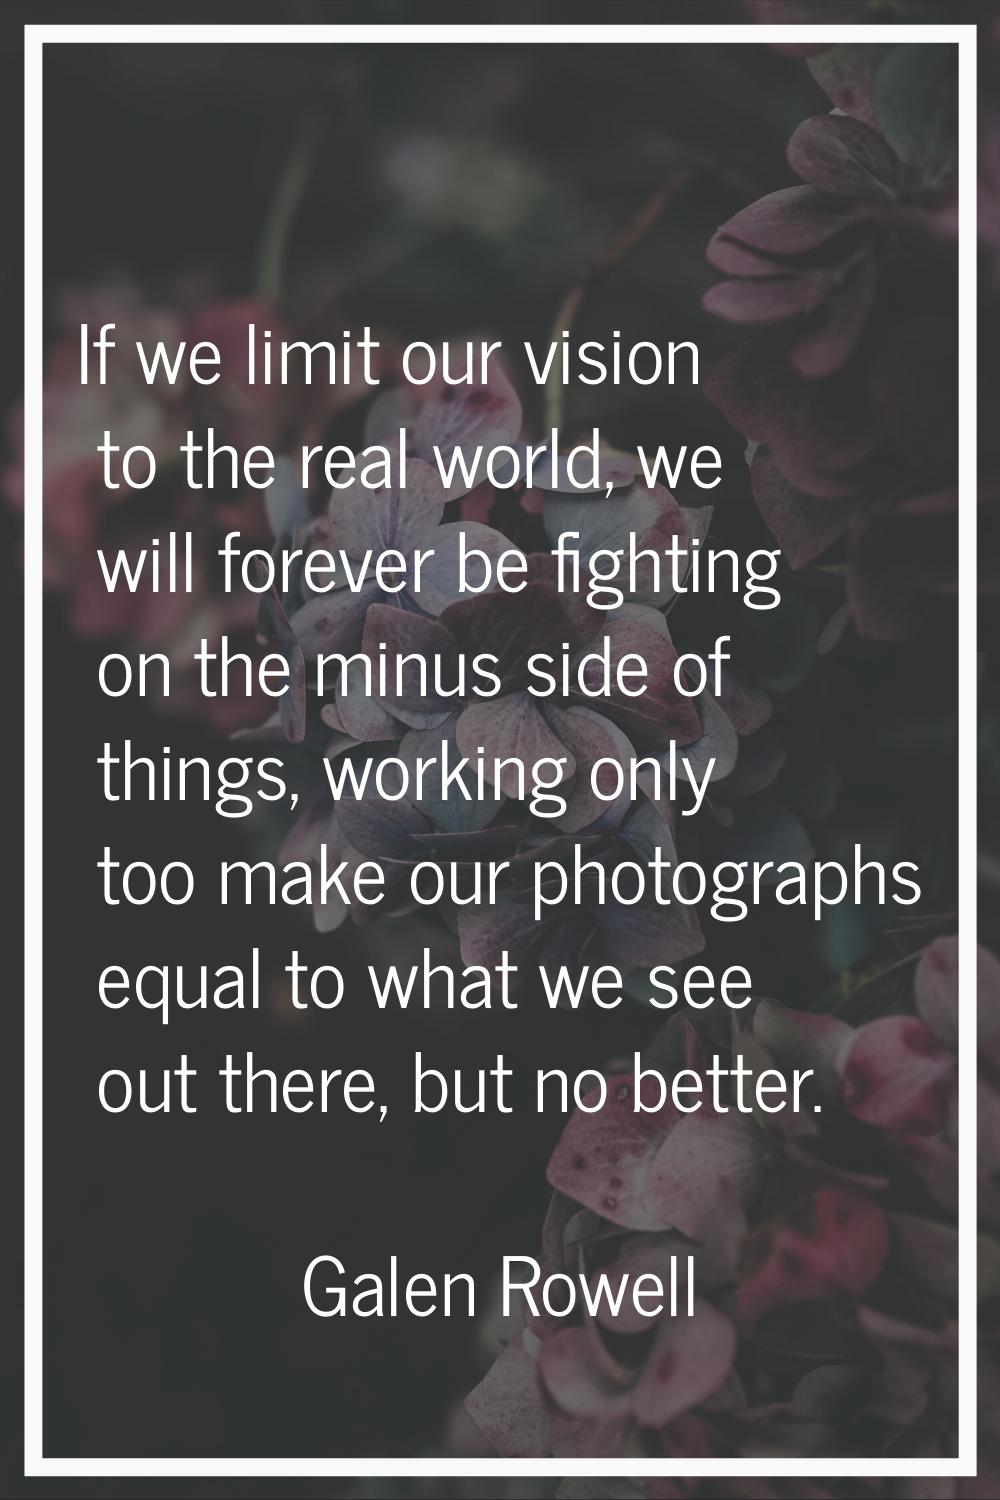 If we limit our vision to the real world, we will forever be fighting on the minus side of things, 